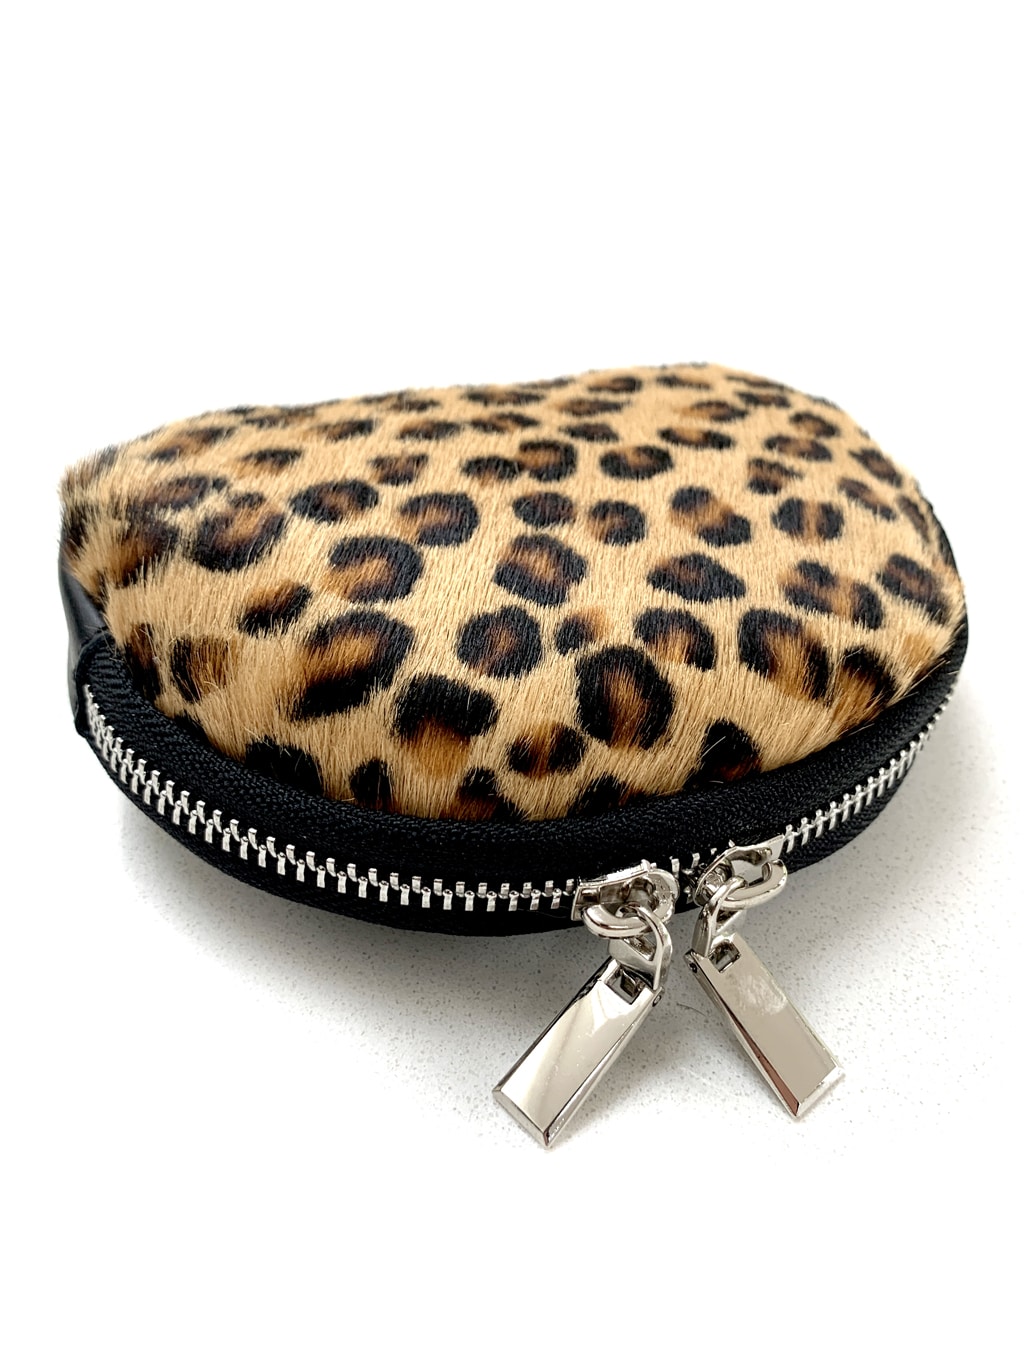 Disaster Designs - Animal Print Lilac Purse from House of Disaster |  Fashion | Swagger